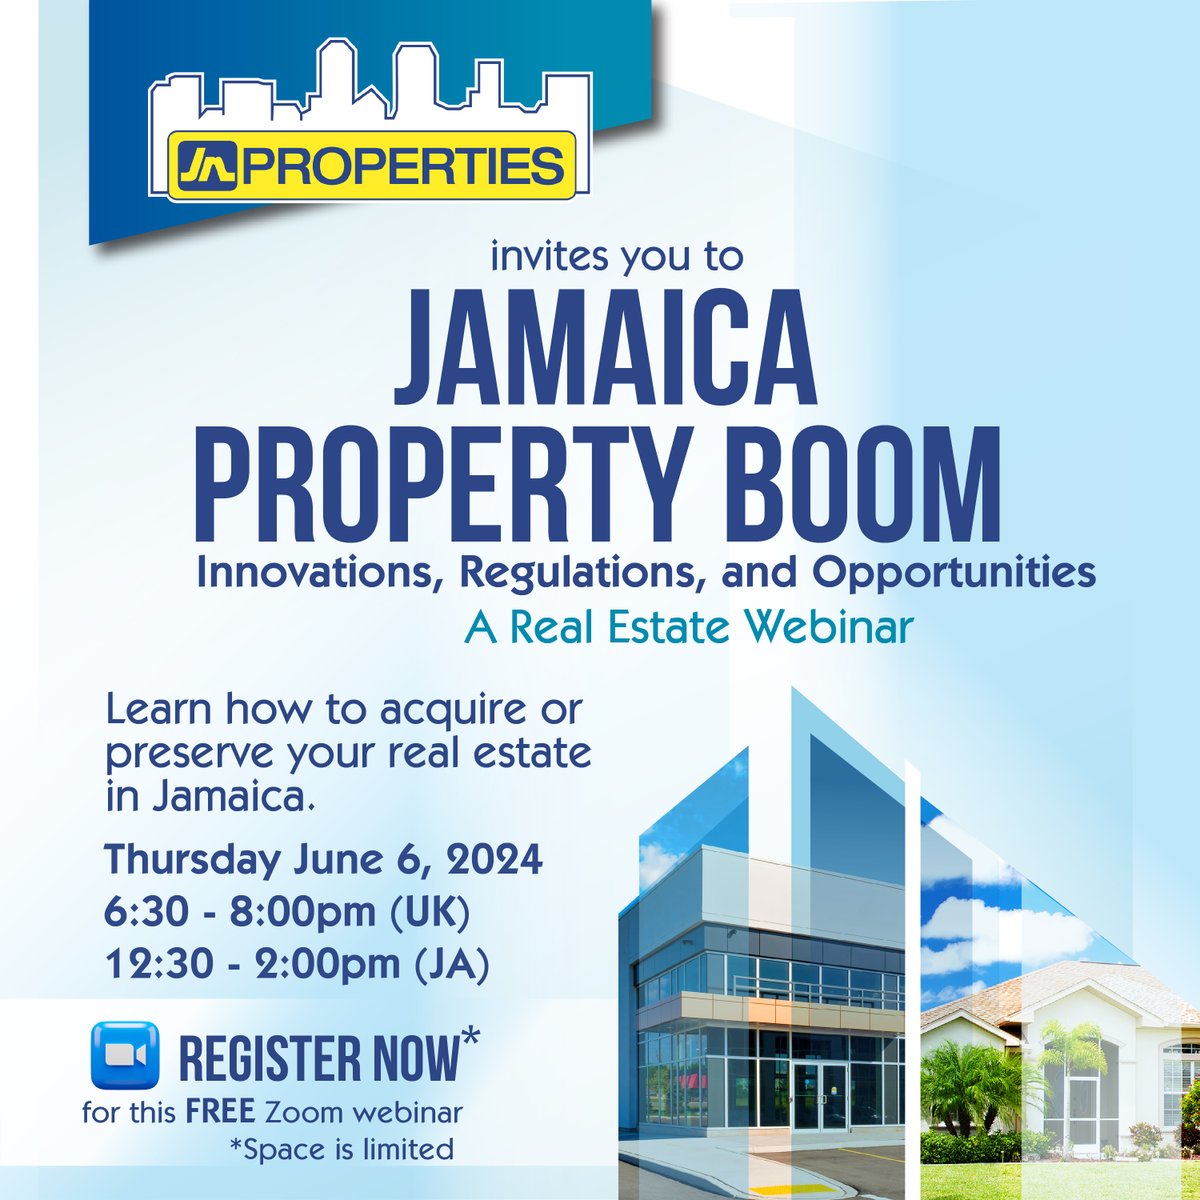 New: The Jamaica real estate market predicted to reach US$128 billion (£101.9 billion) by 2028. Want to know more? Attend the FREE webinar with JN Properties on Thursday June 6, 2024 Register now: jnpropertieslimited.com/webinar/